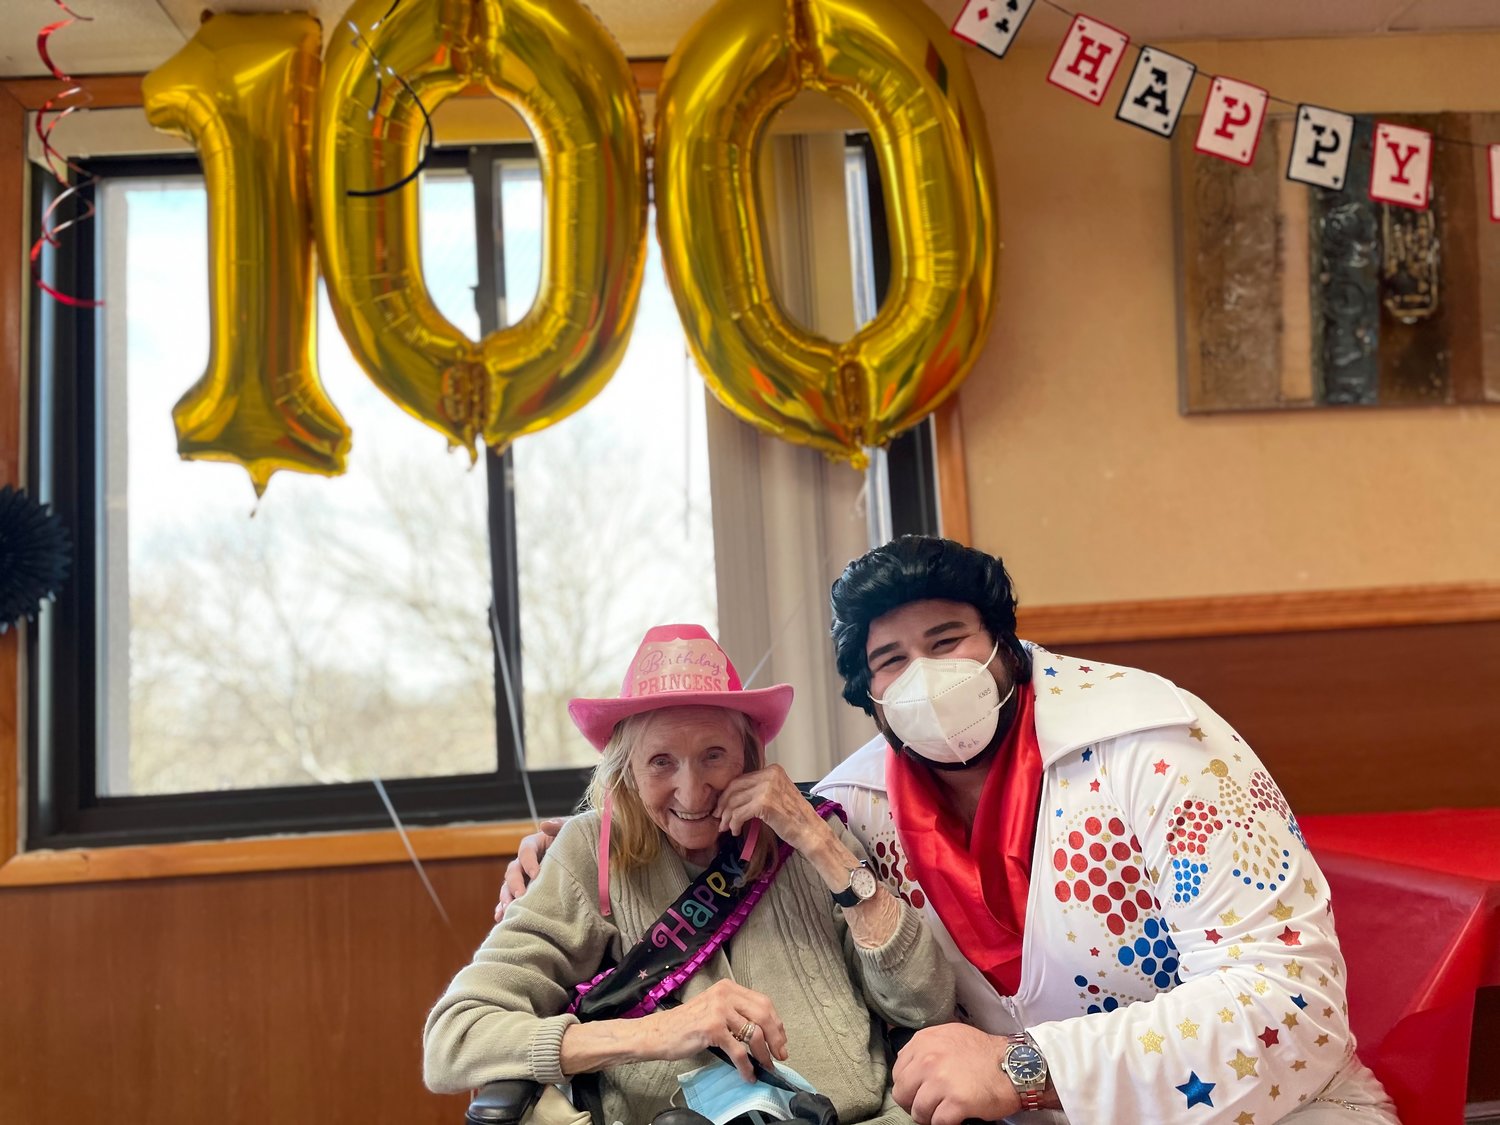 Virginia “Ginny” Brinker celebrated her 100th birthday with an Elvis impersonator at Suffolk Center Rehabilitation and Nursing in Patchogue.